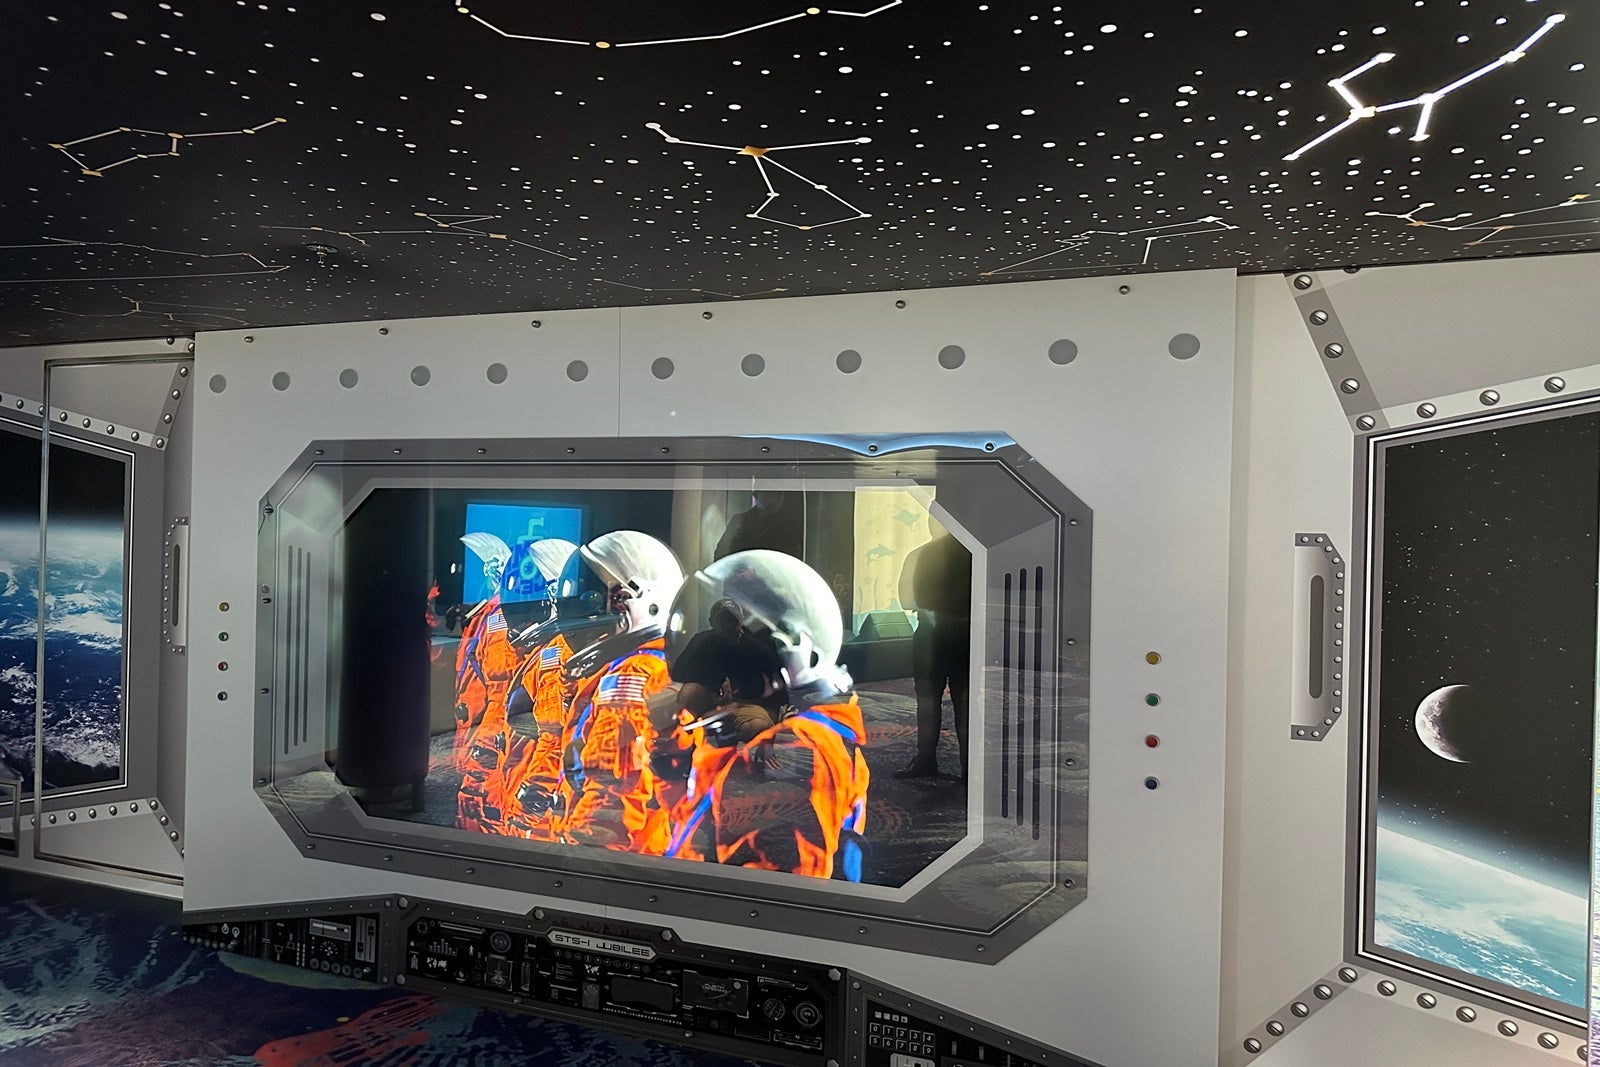 A digital display showing a team of astronauts topped with a light-up ceiling panel of the constellations